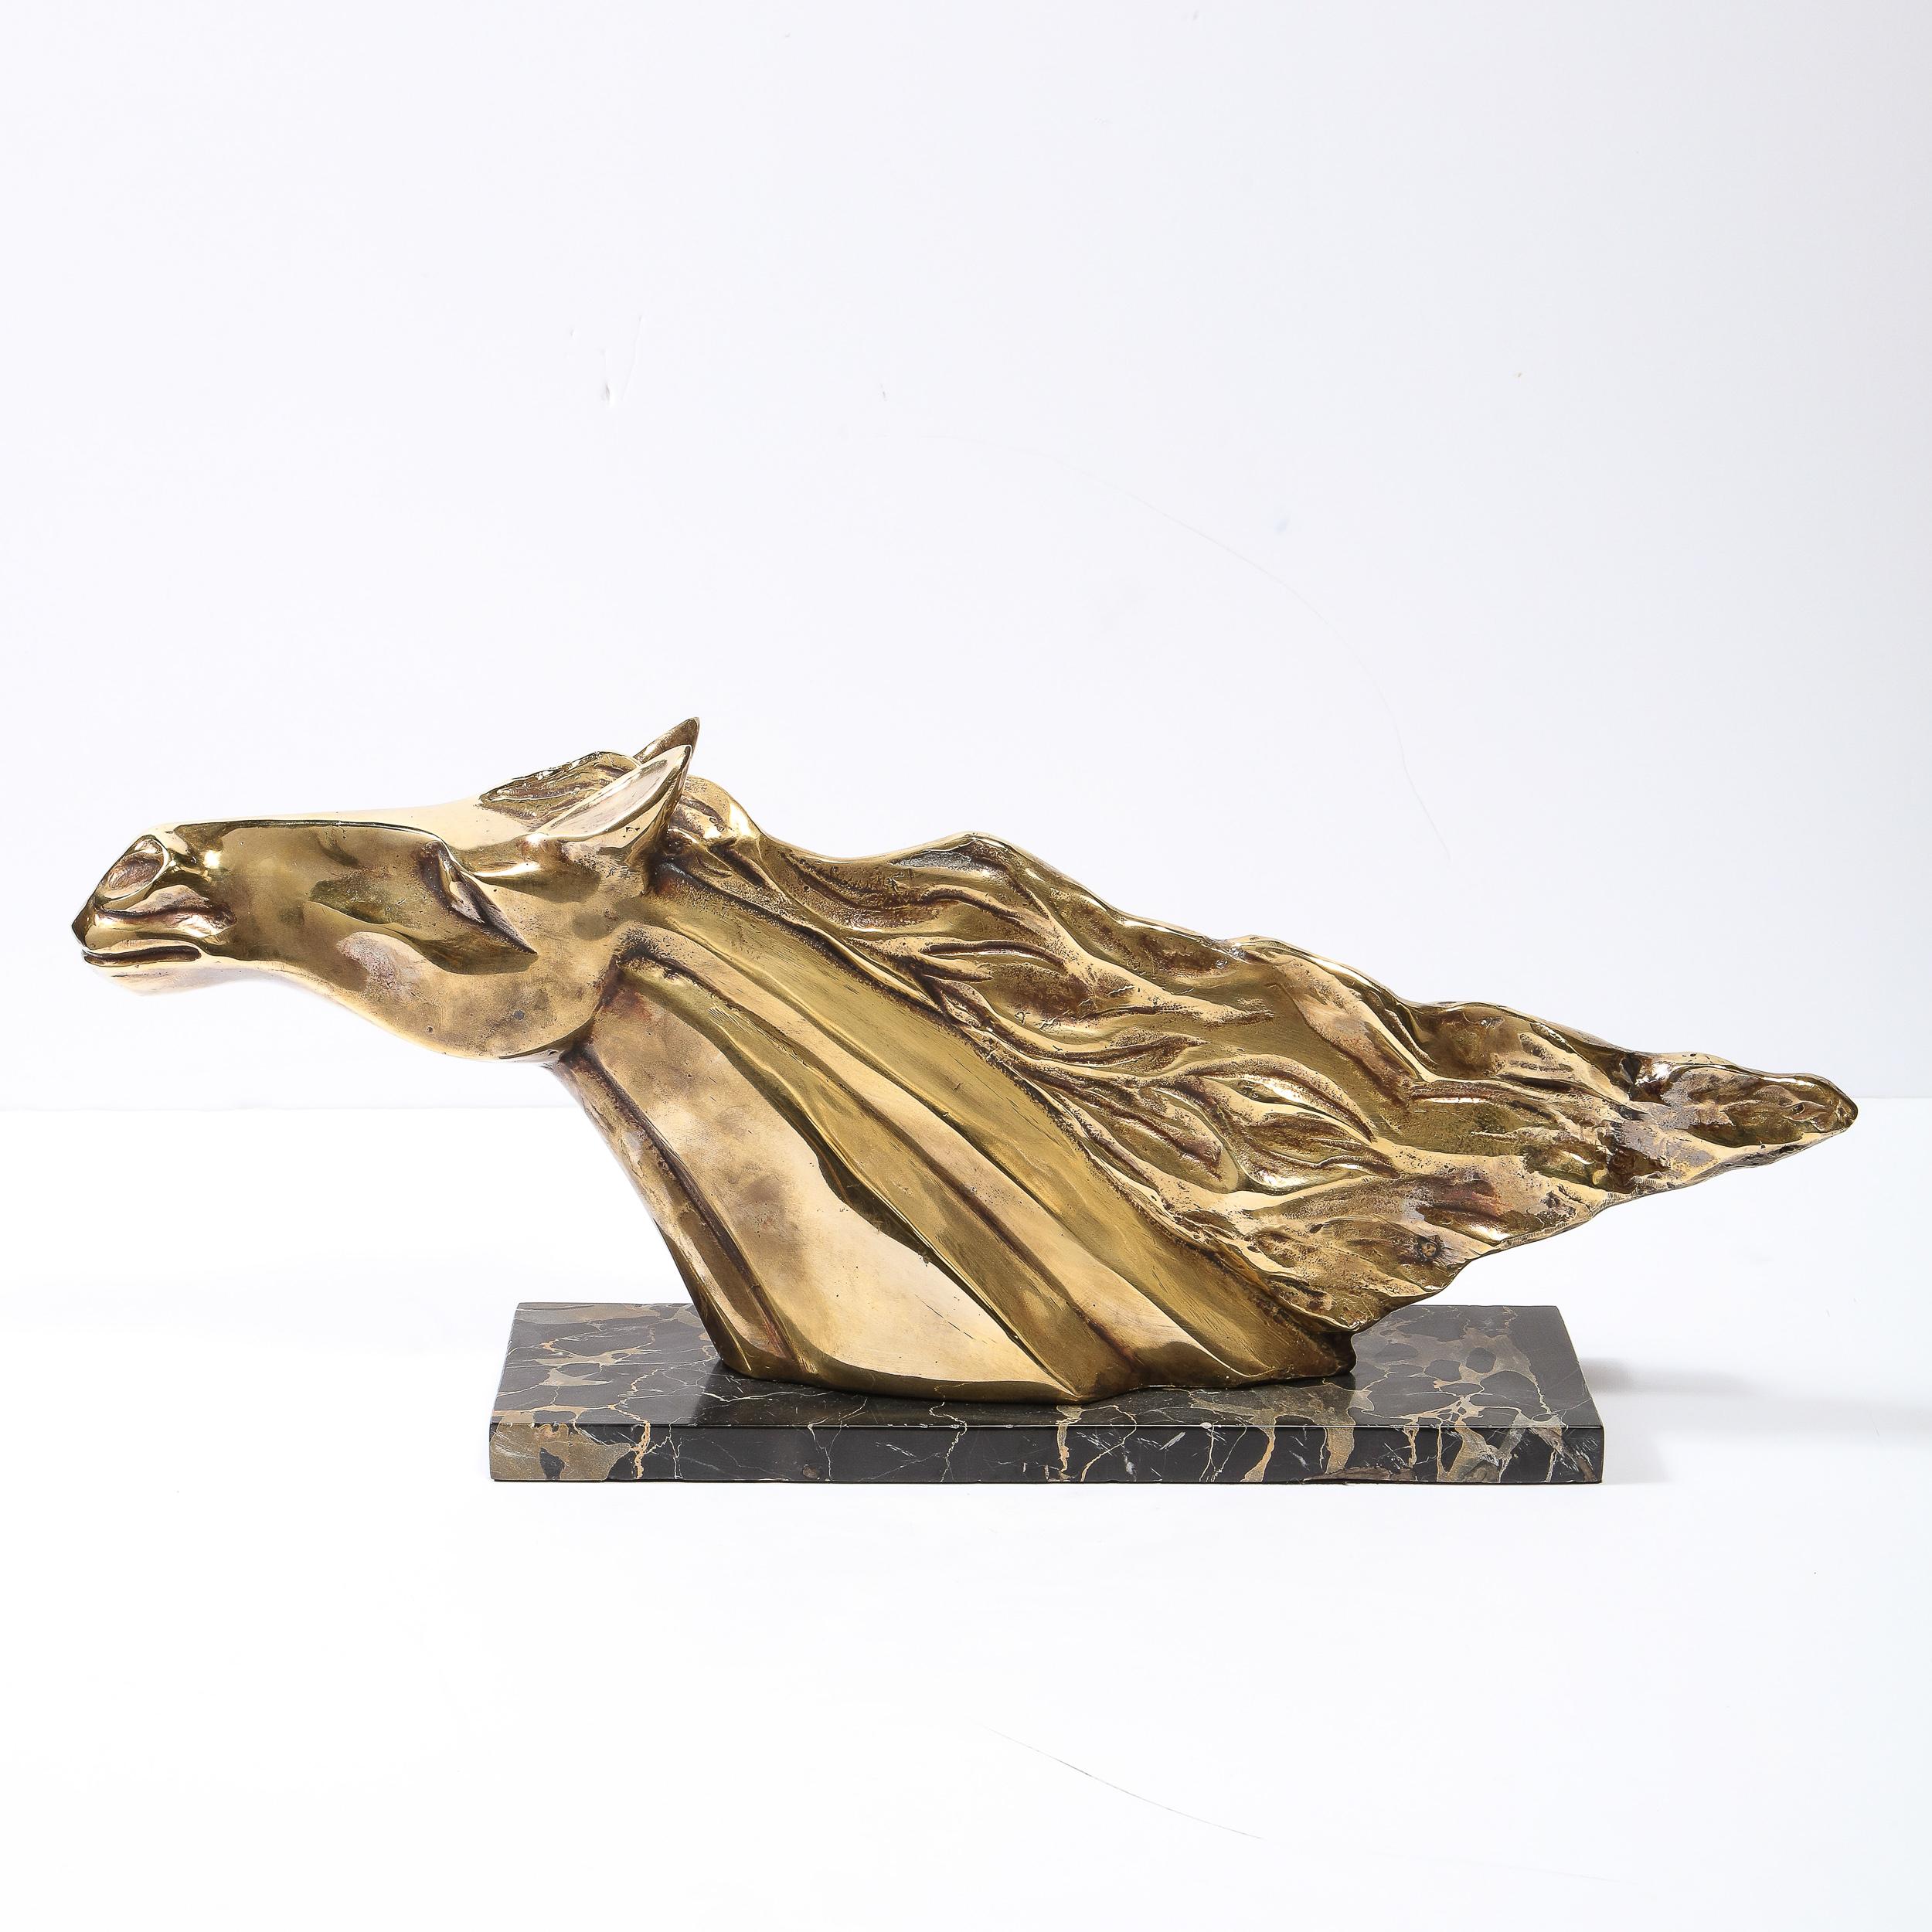 This stunning Art Deco stylized stallion sculpture was realized in France circa 1940. It features an equine form with a flowing mane hand sculpted in lustrous polished brass and presented on a volumetric rectangular pedestal in exotic black Portoro